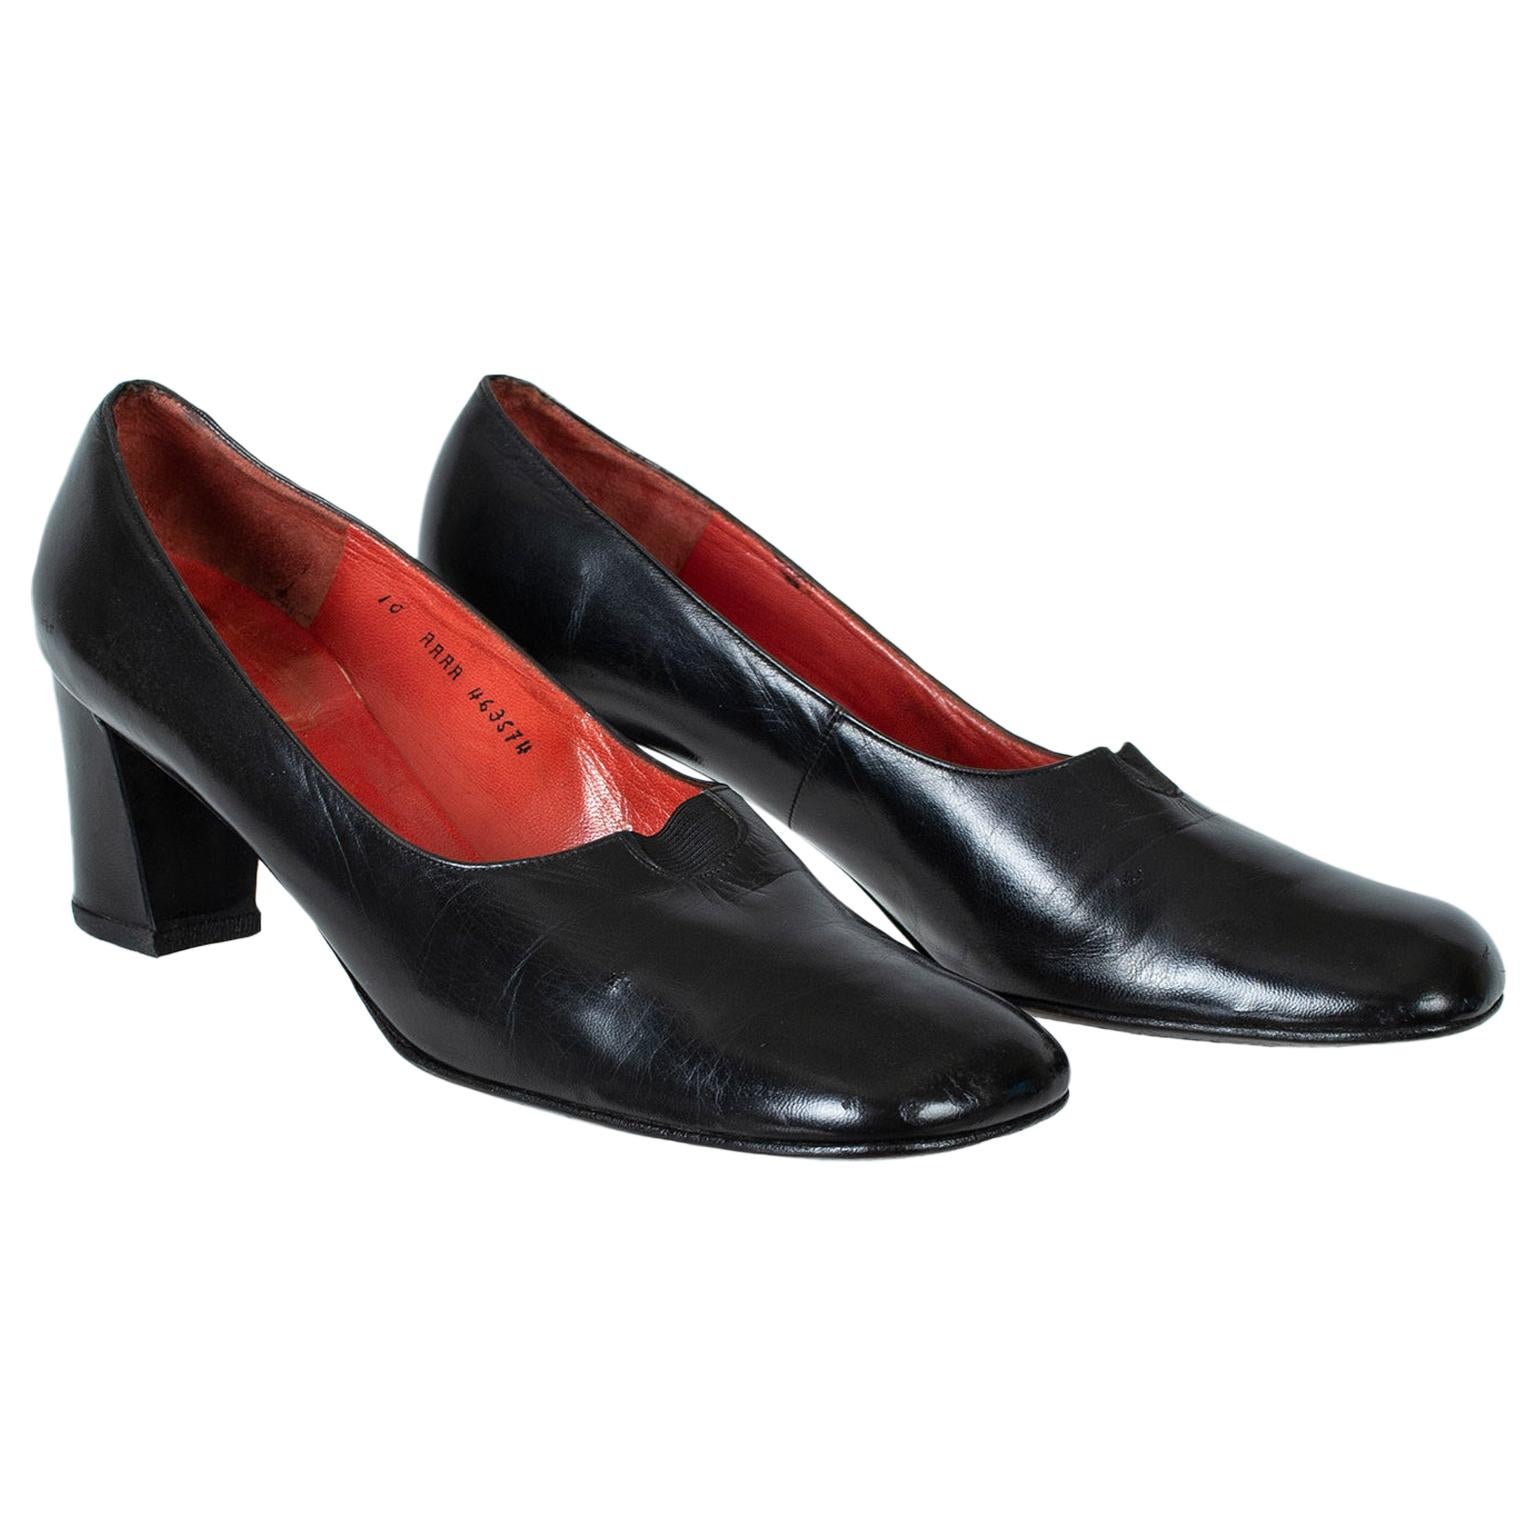 Black Souliers Christian Dior Block Heel Pumps with High Vamp – US 10, 1960s